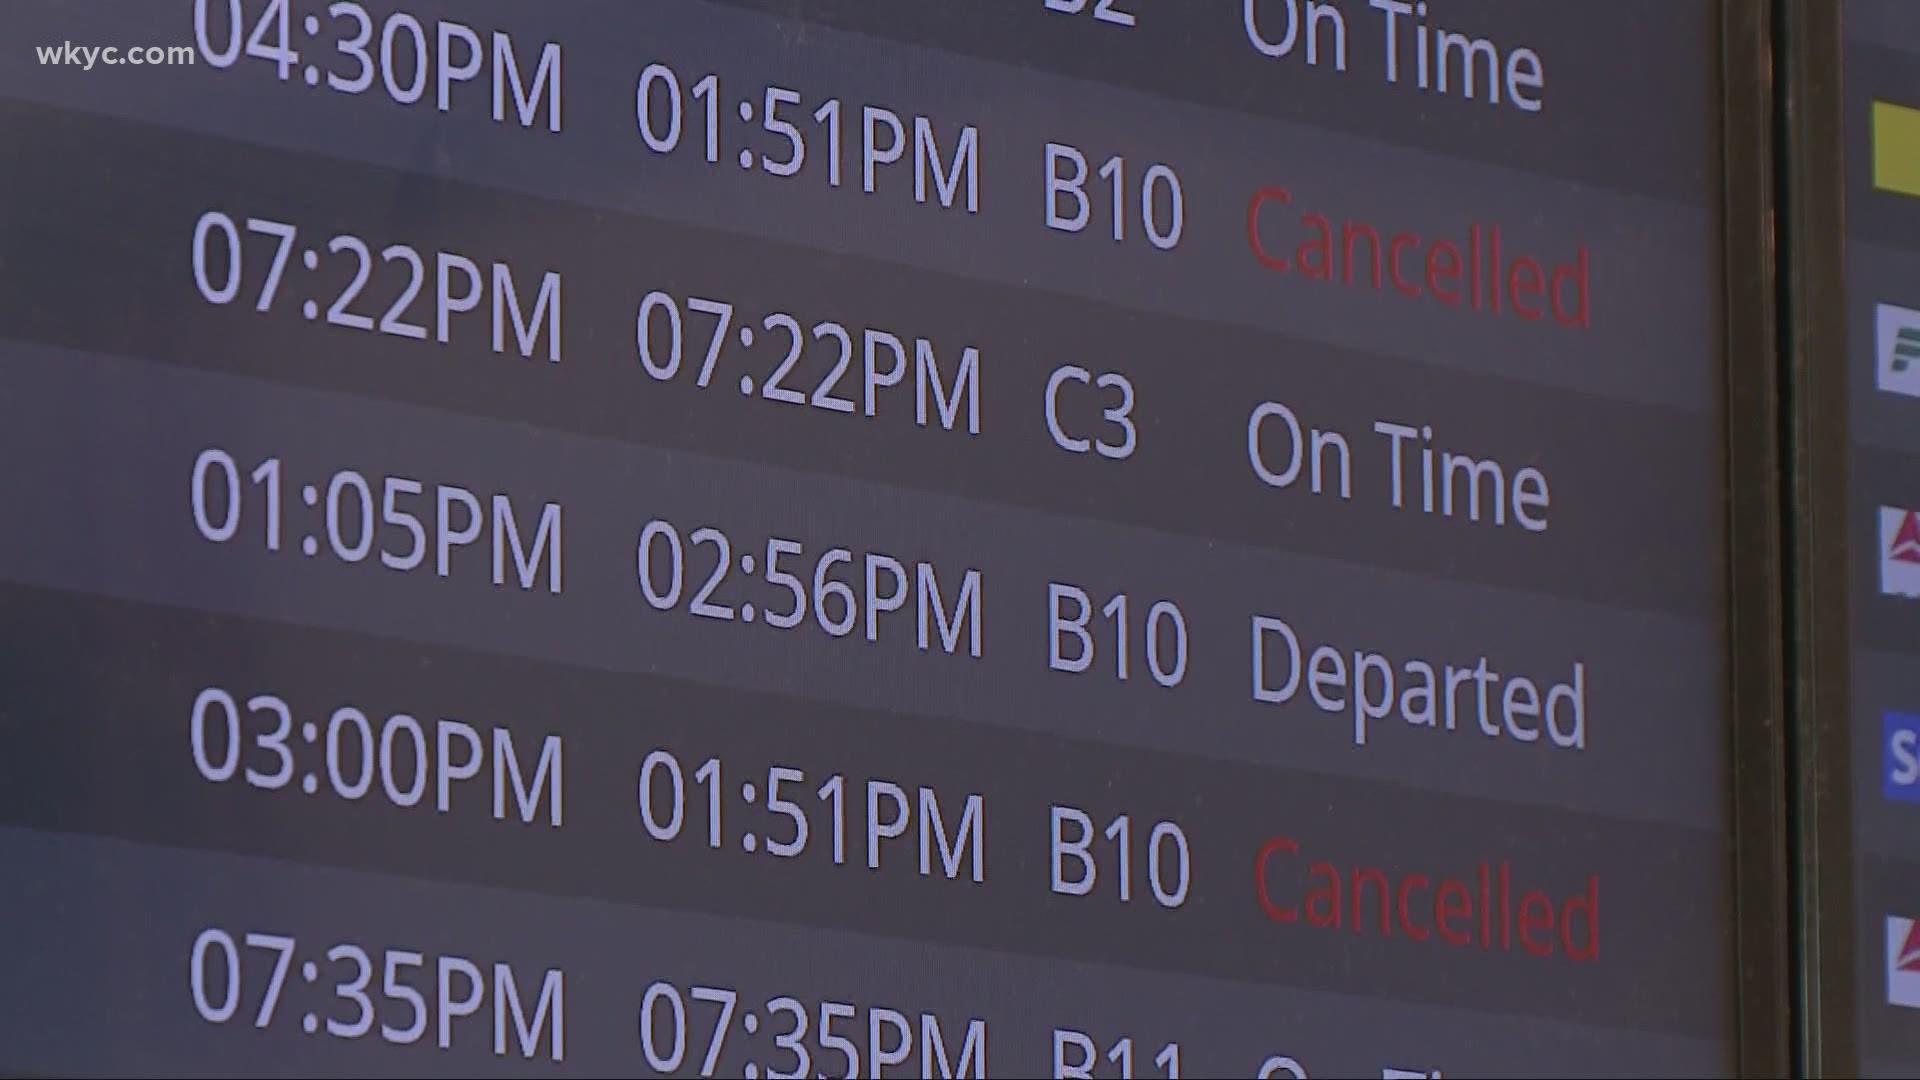 Whether it be delays or long lines, the surge in plane passengers is creating problems on the ground and in the sky.